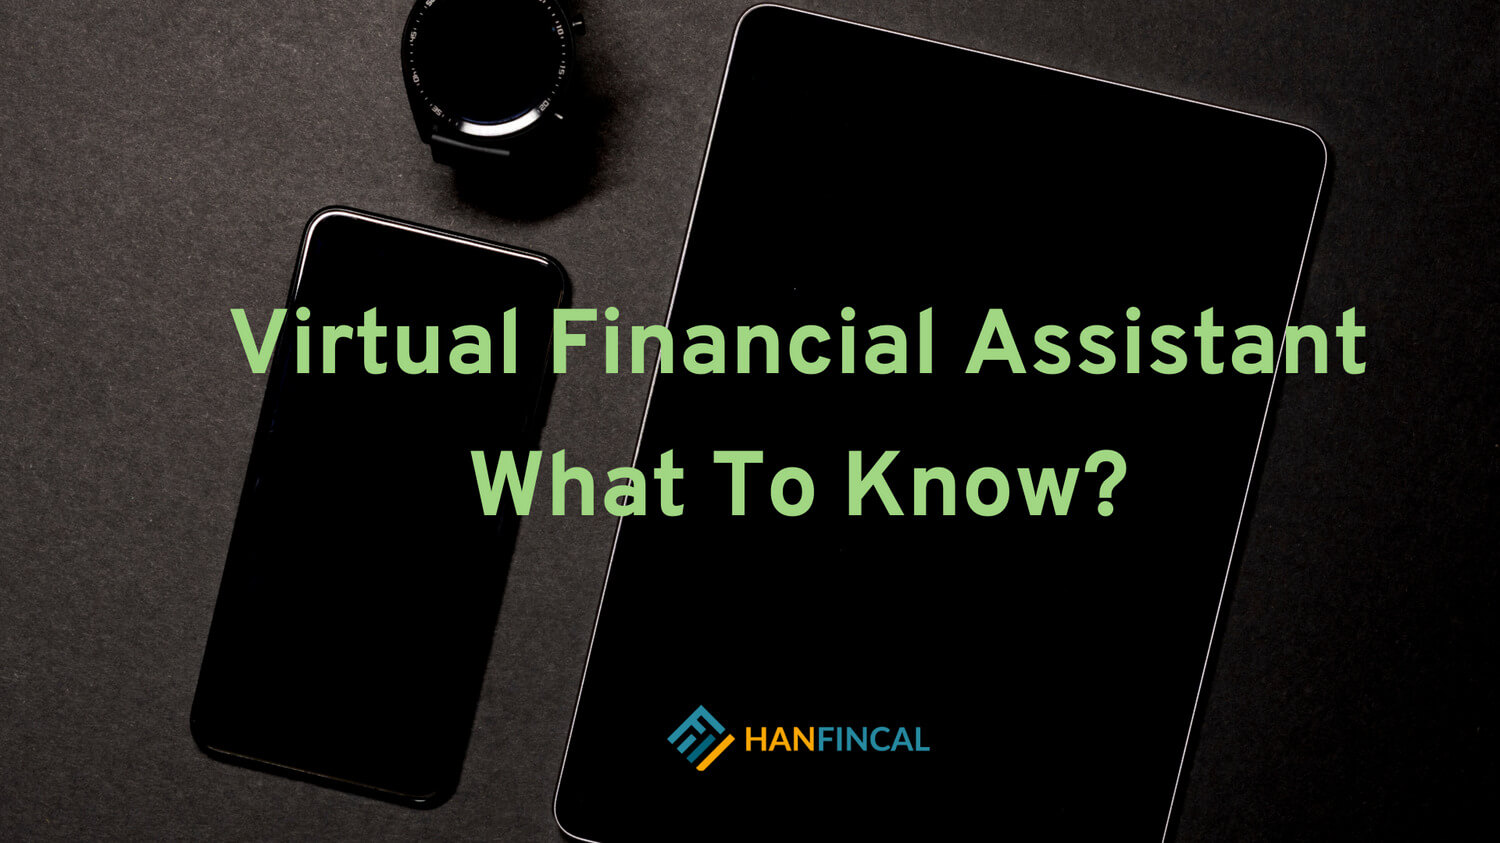 Virtual Financial Assistants - What To Know